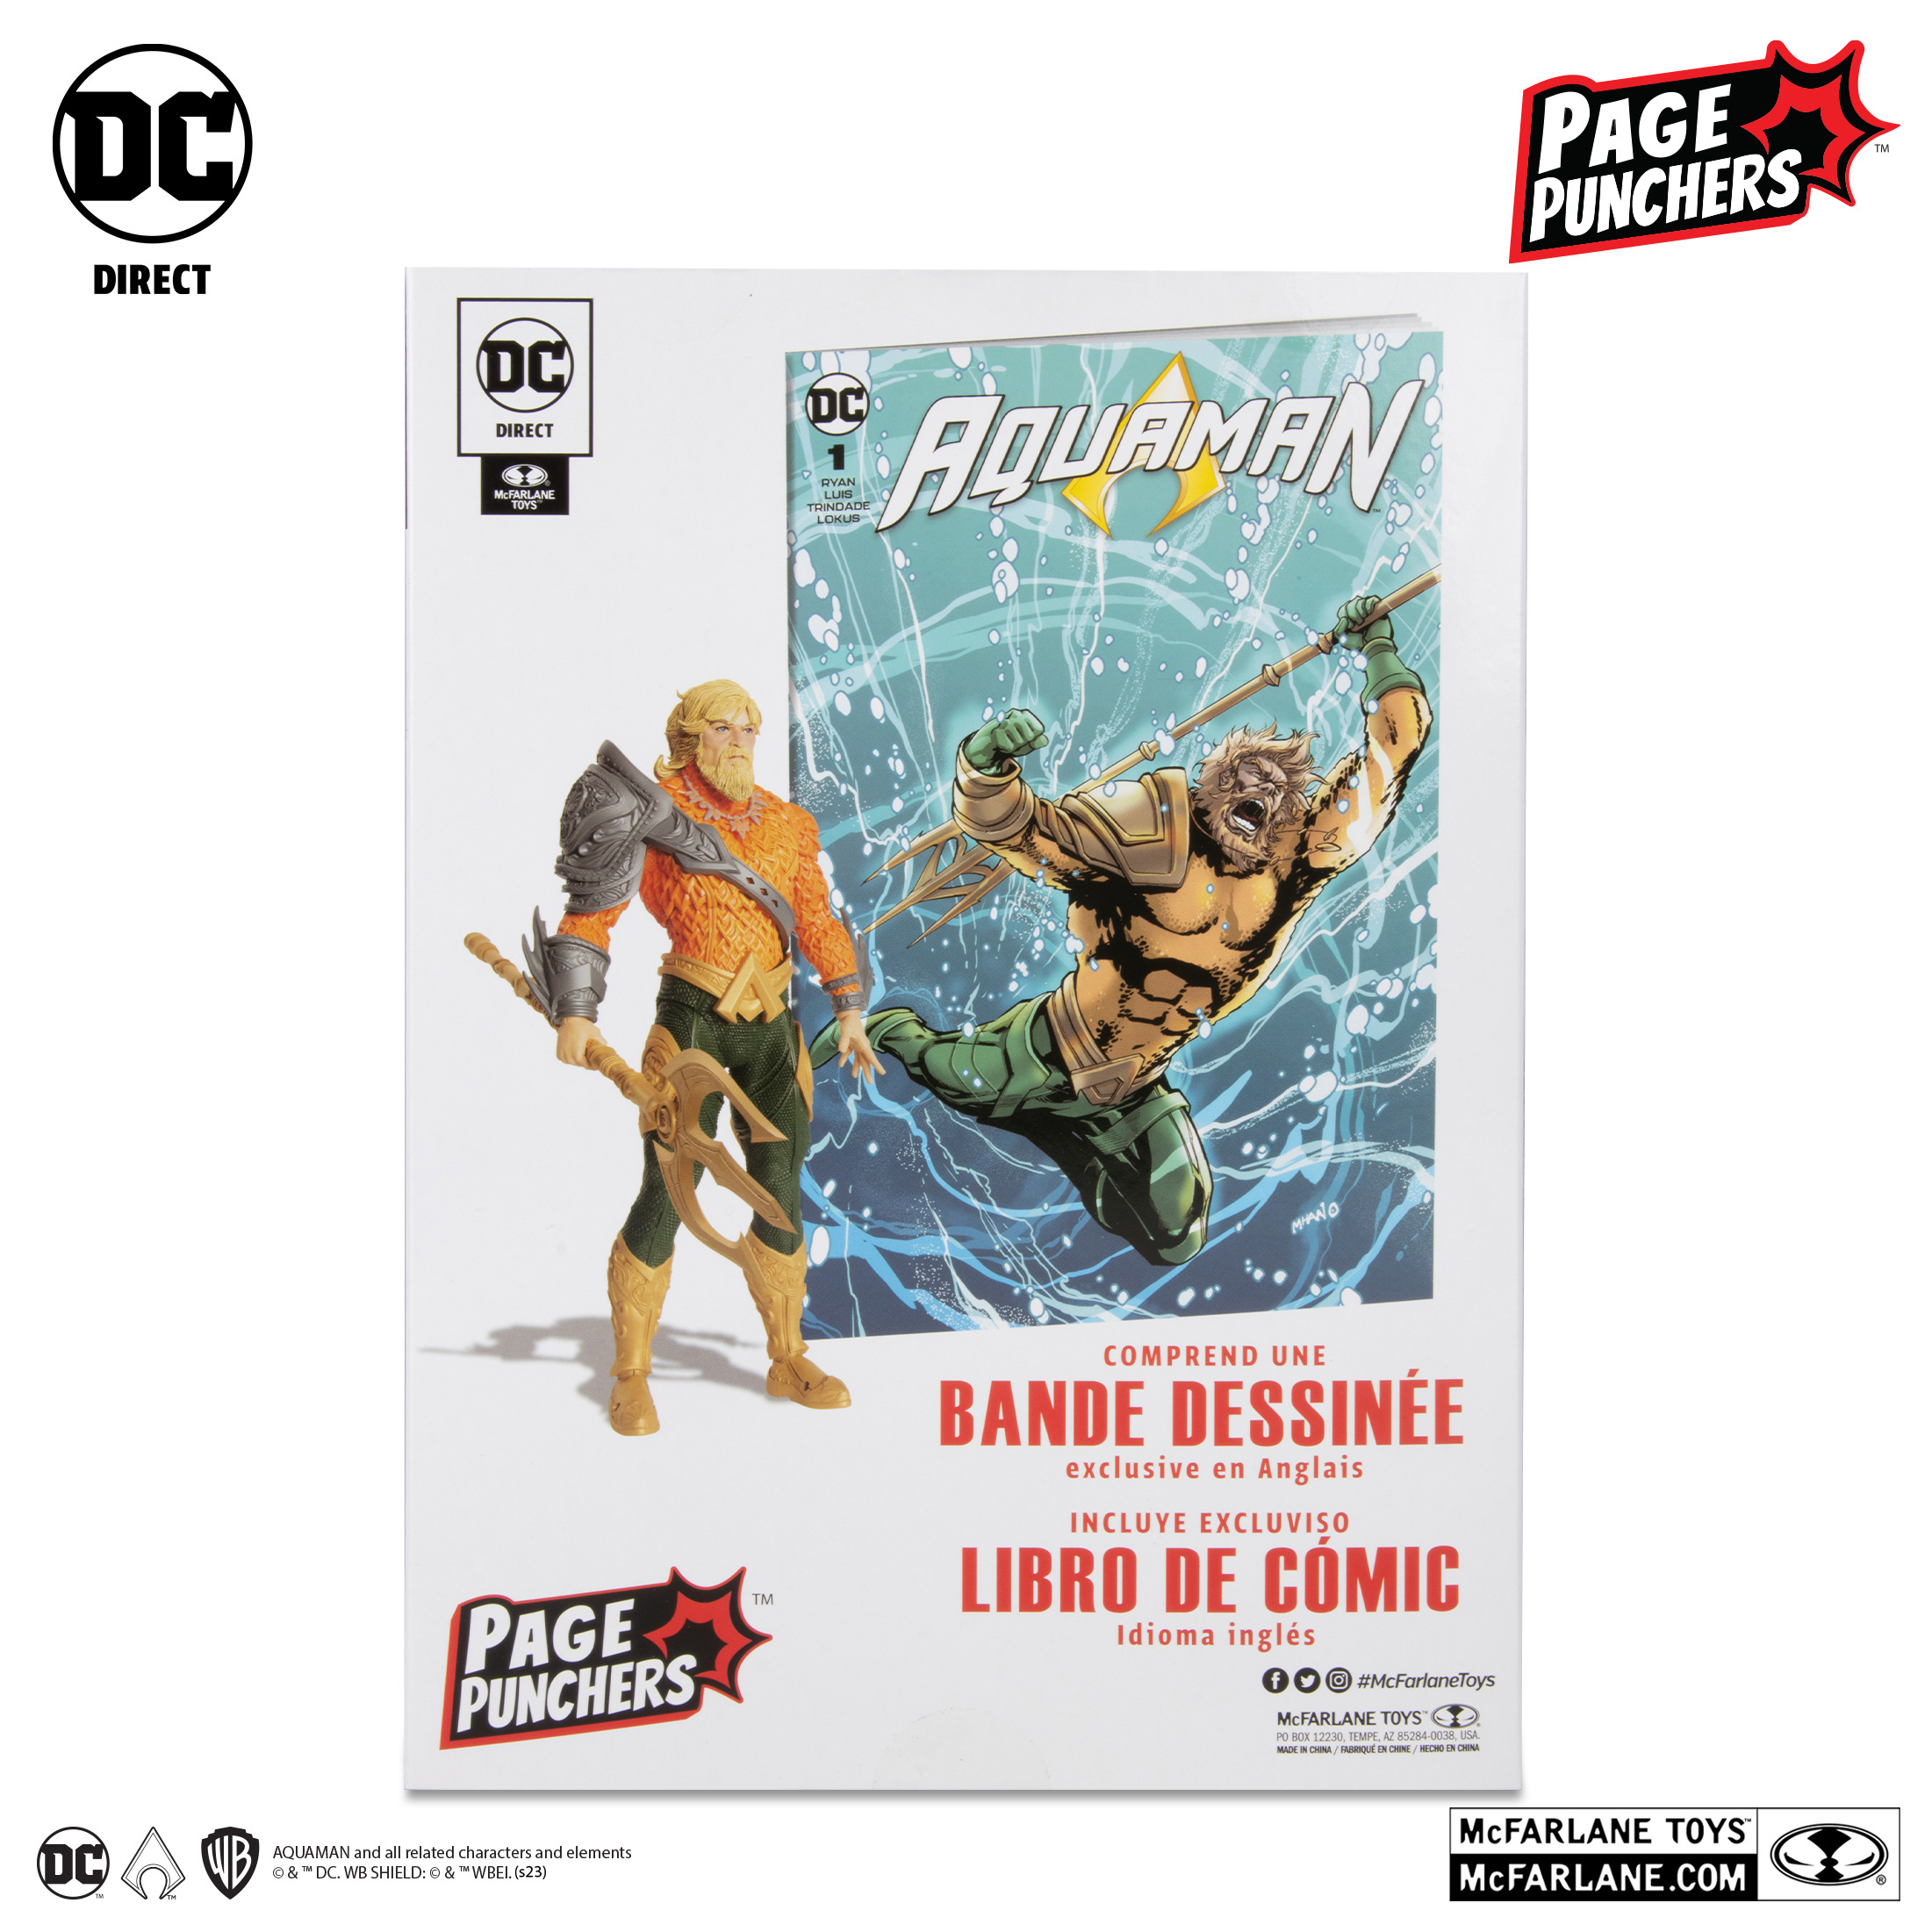 McFarlane Toys - Another wave of Page Punchers is here! Aquaman 7 scale  figure from the brand new Aquaman comic is available for pre-order NOW at  select retailers! ➡️  Includes a